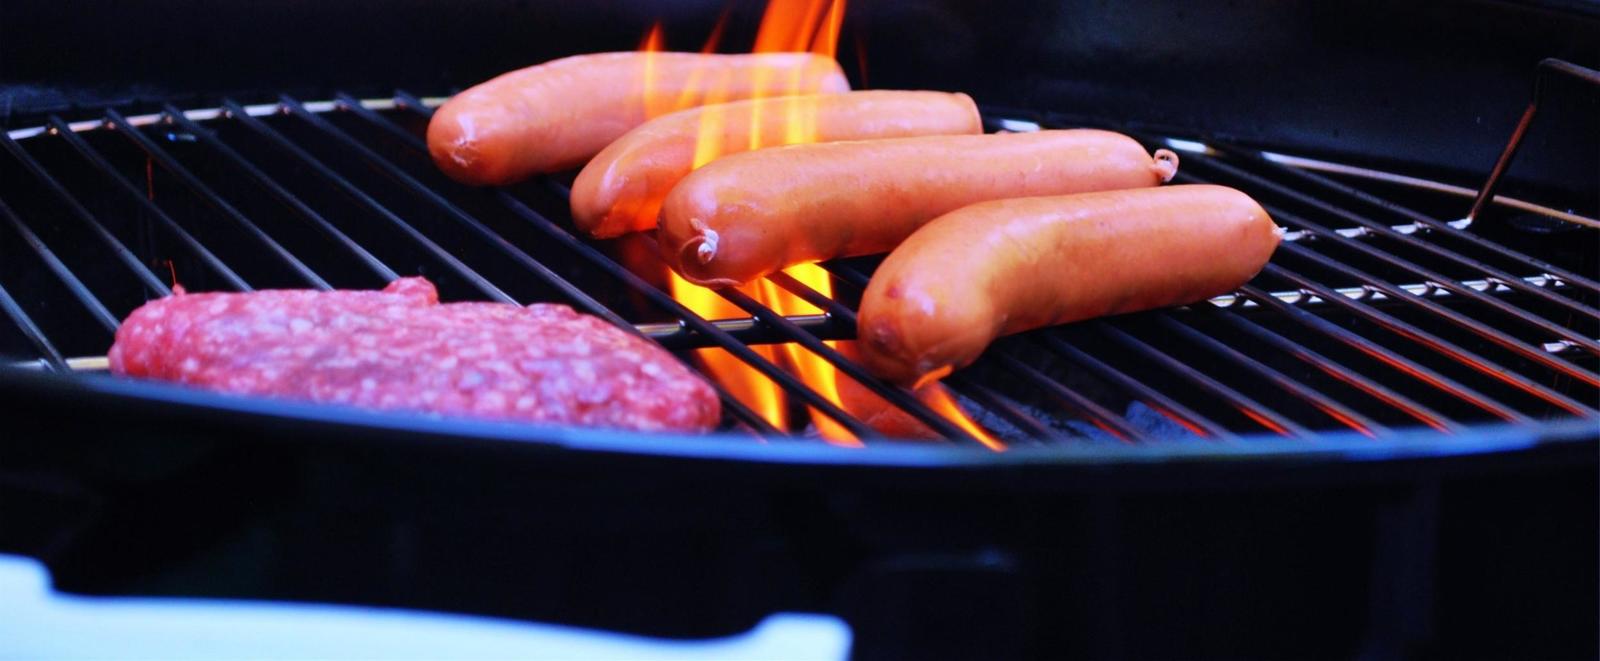 BBQ 101: How to Choose An Outdoor Barbecue Grill